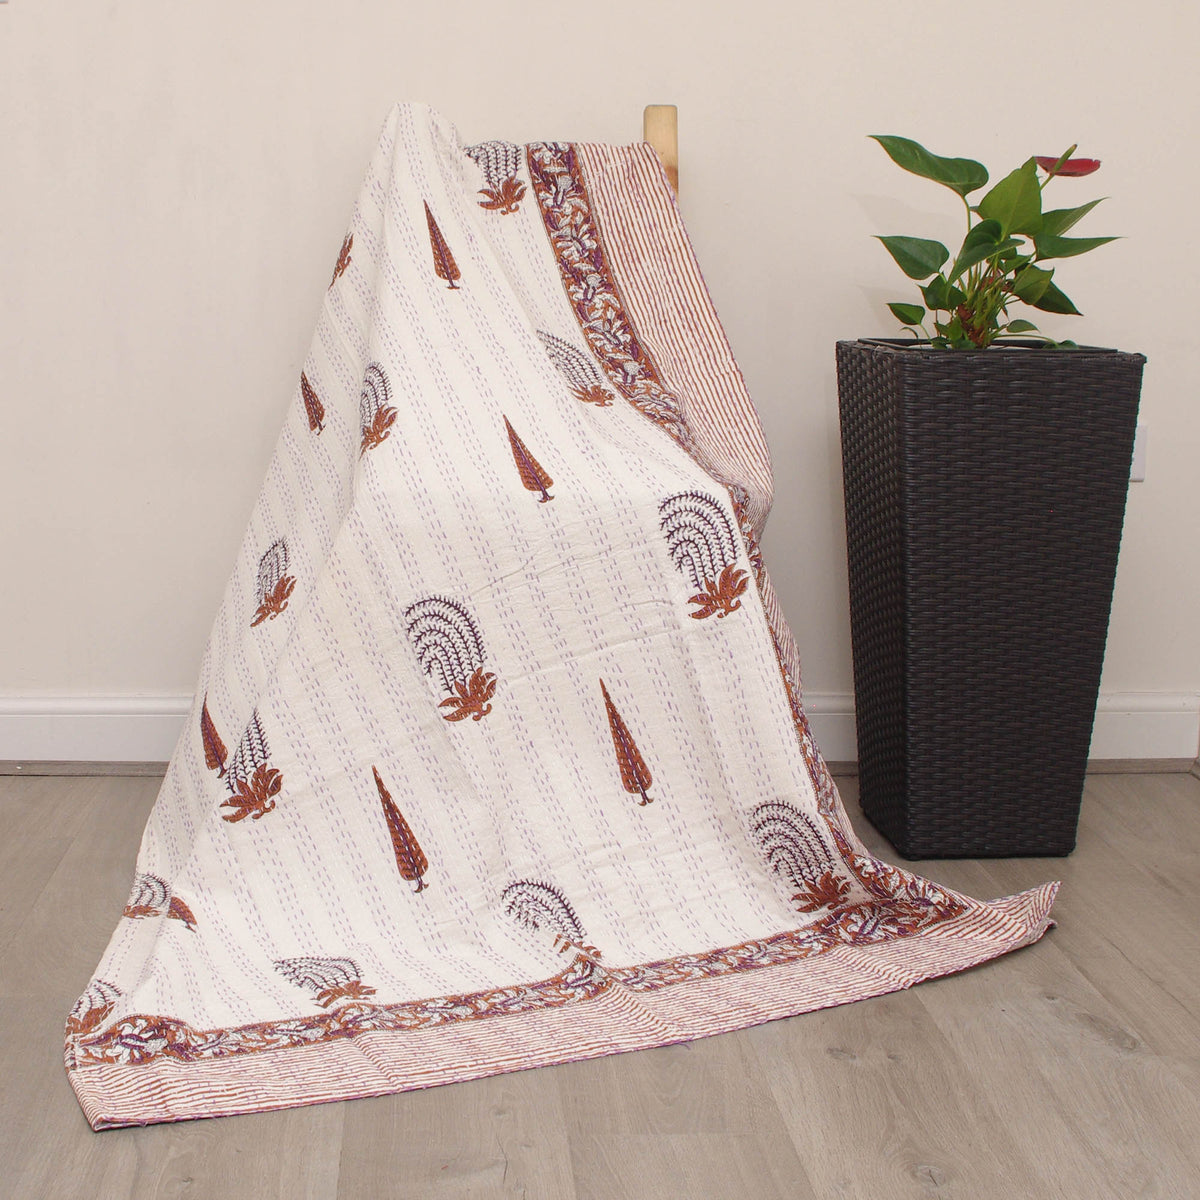 Block Printed With Brown & White Foliage Cypress Tree Cotton Queen Indian Kantha Quilt Bedspread